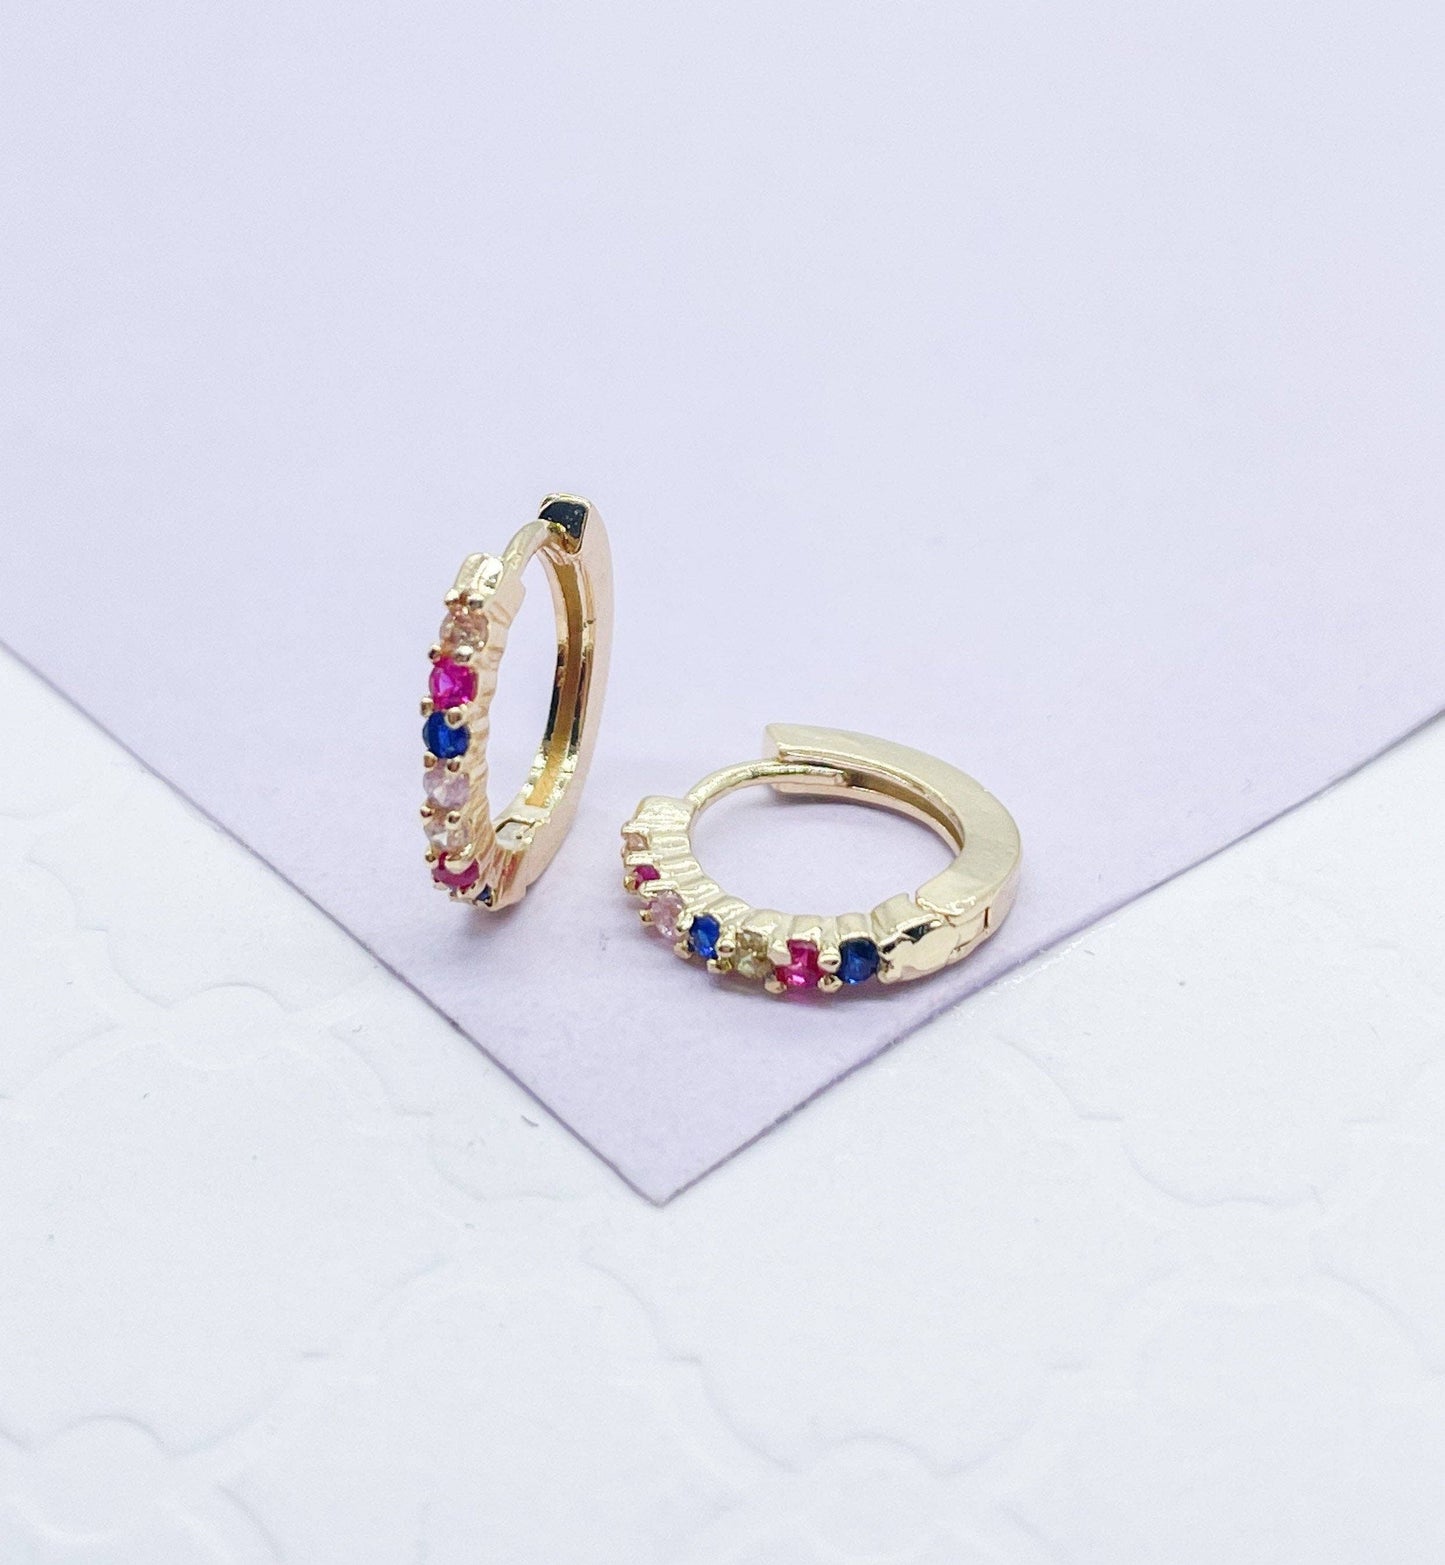 18k Gold Filled Extra Small Colorful CZ Stone Huggies Earring